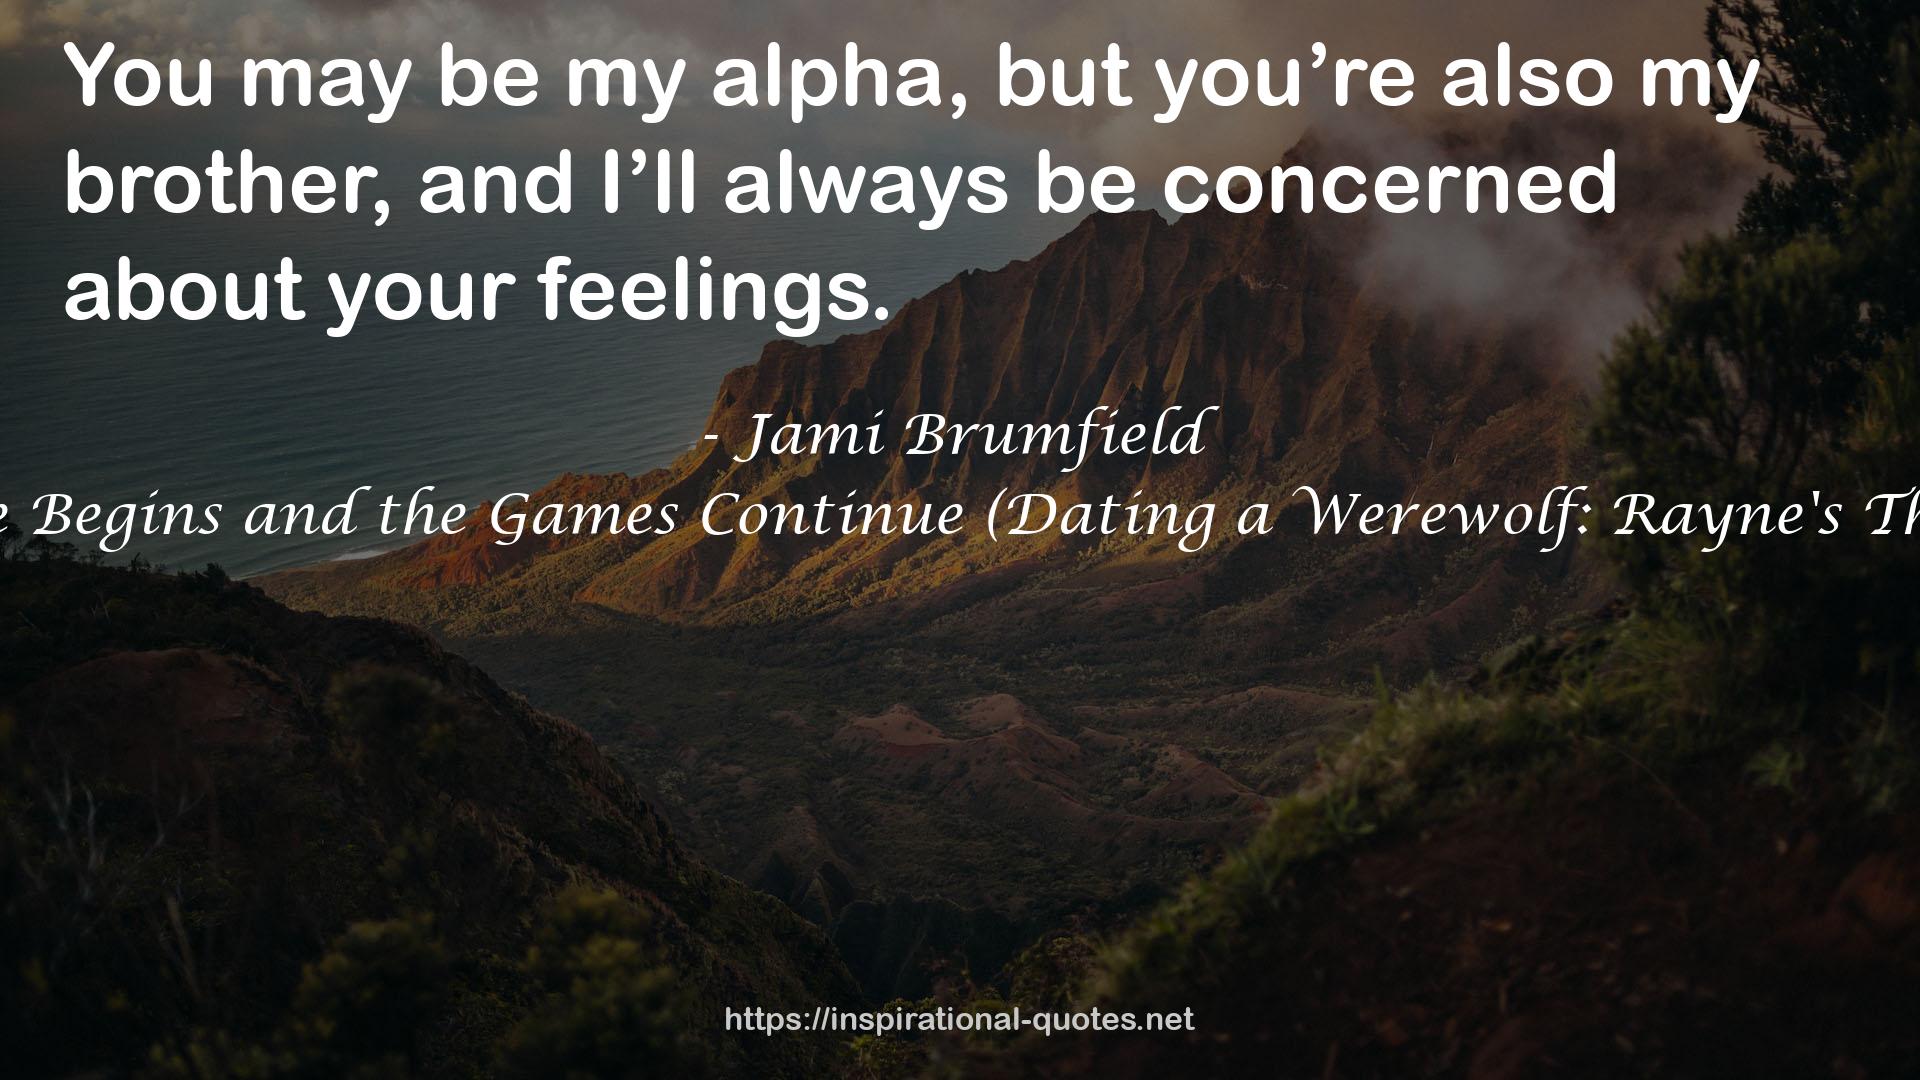 The Battle Begins and the Games Continue (Dating a Werewolf: Rayne's Thunder #5) QUOTES